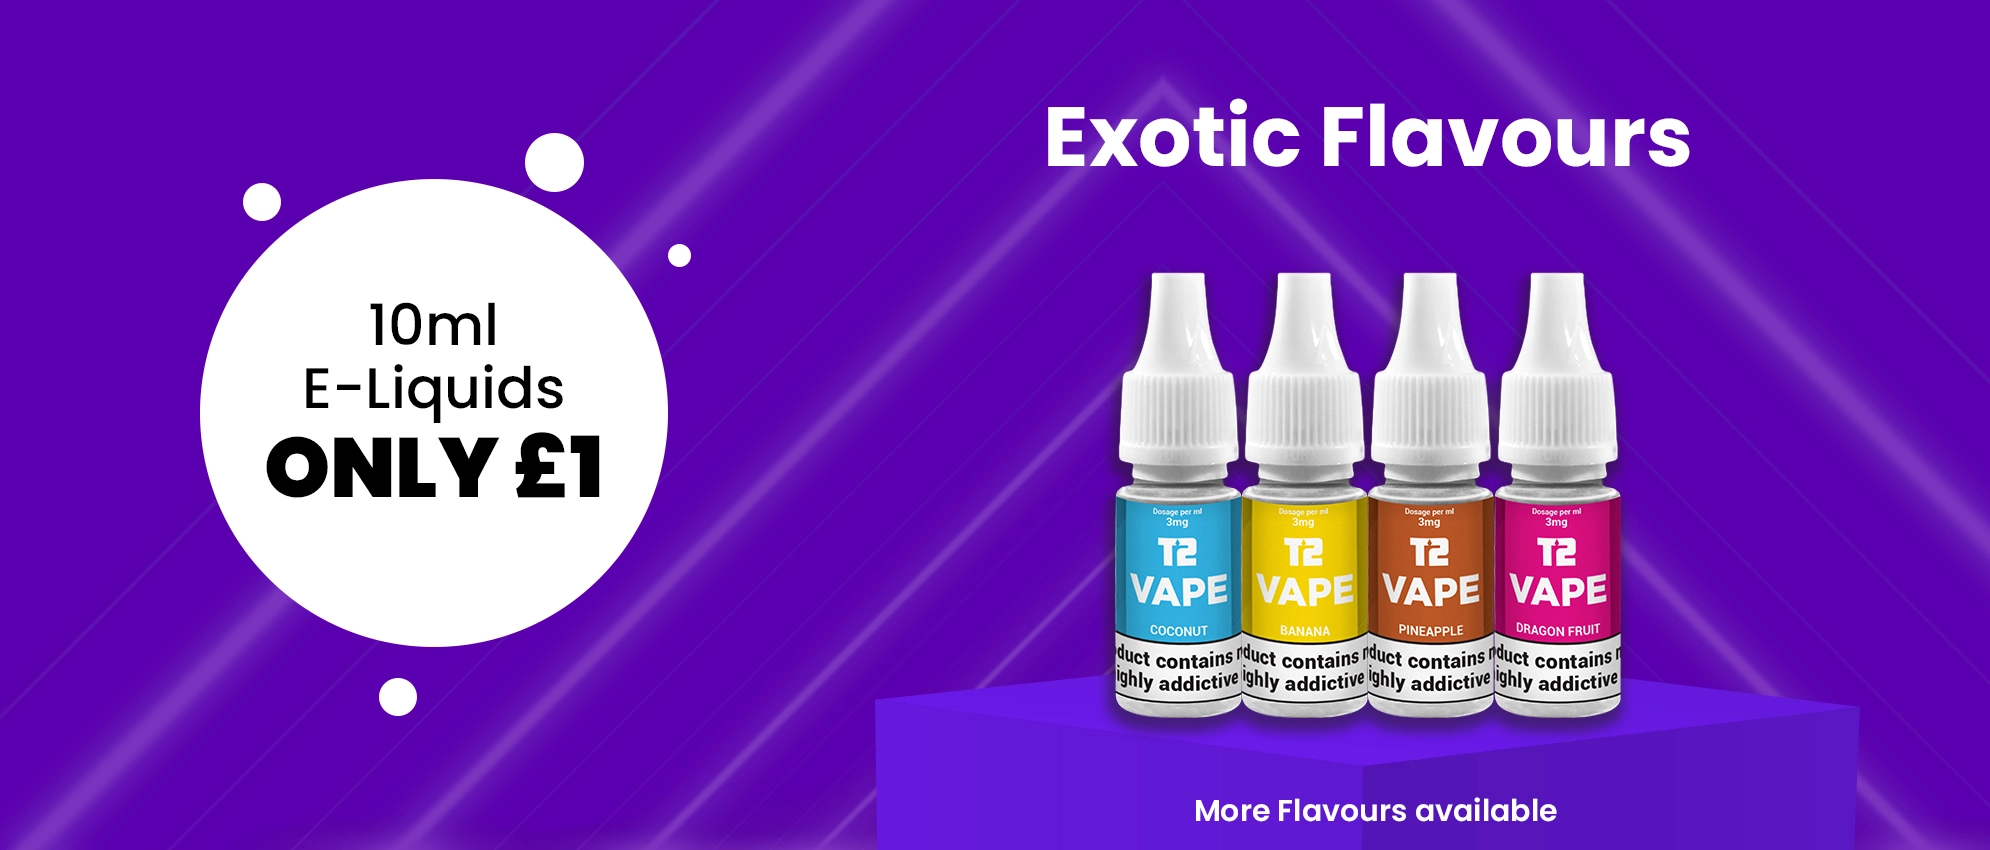 Exotic Flavours